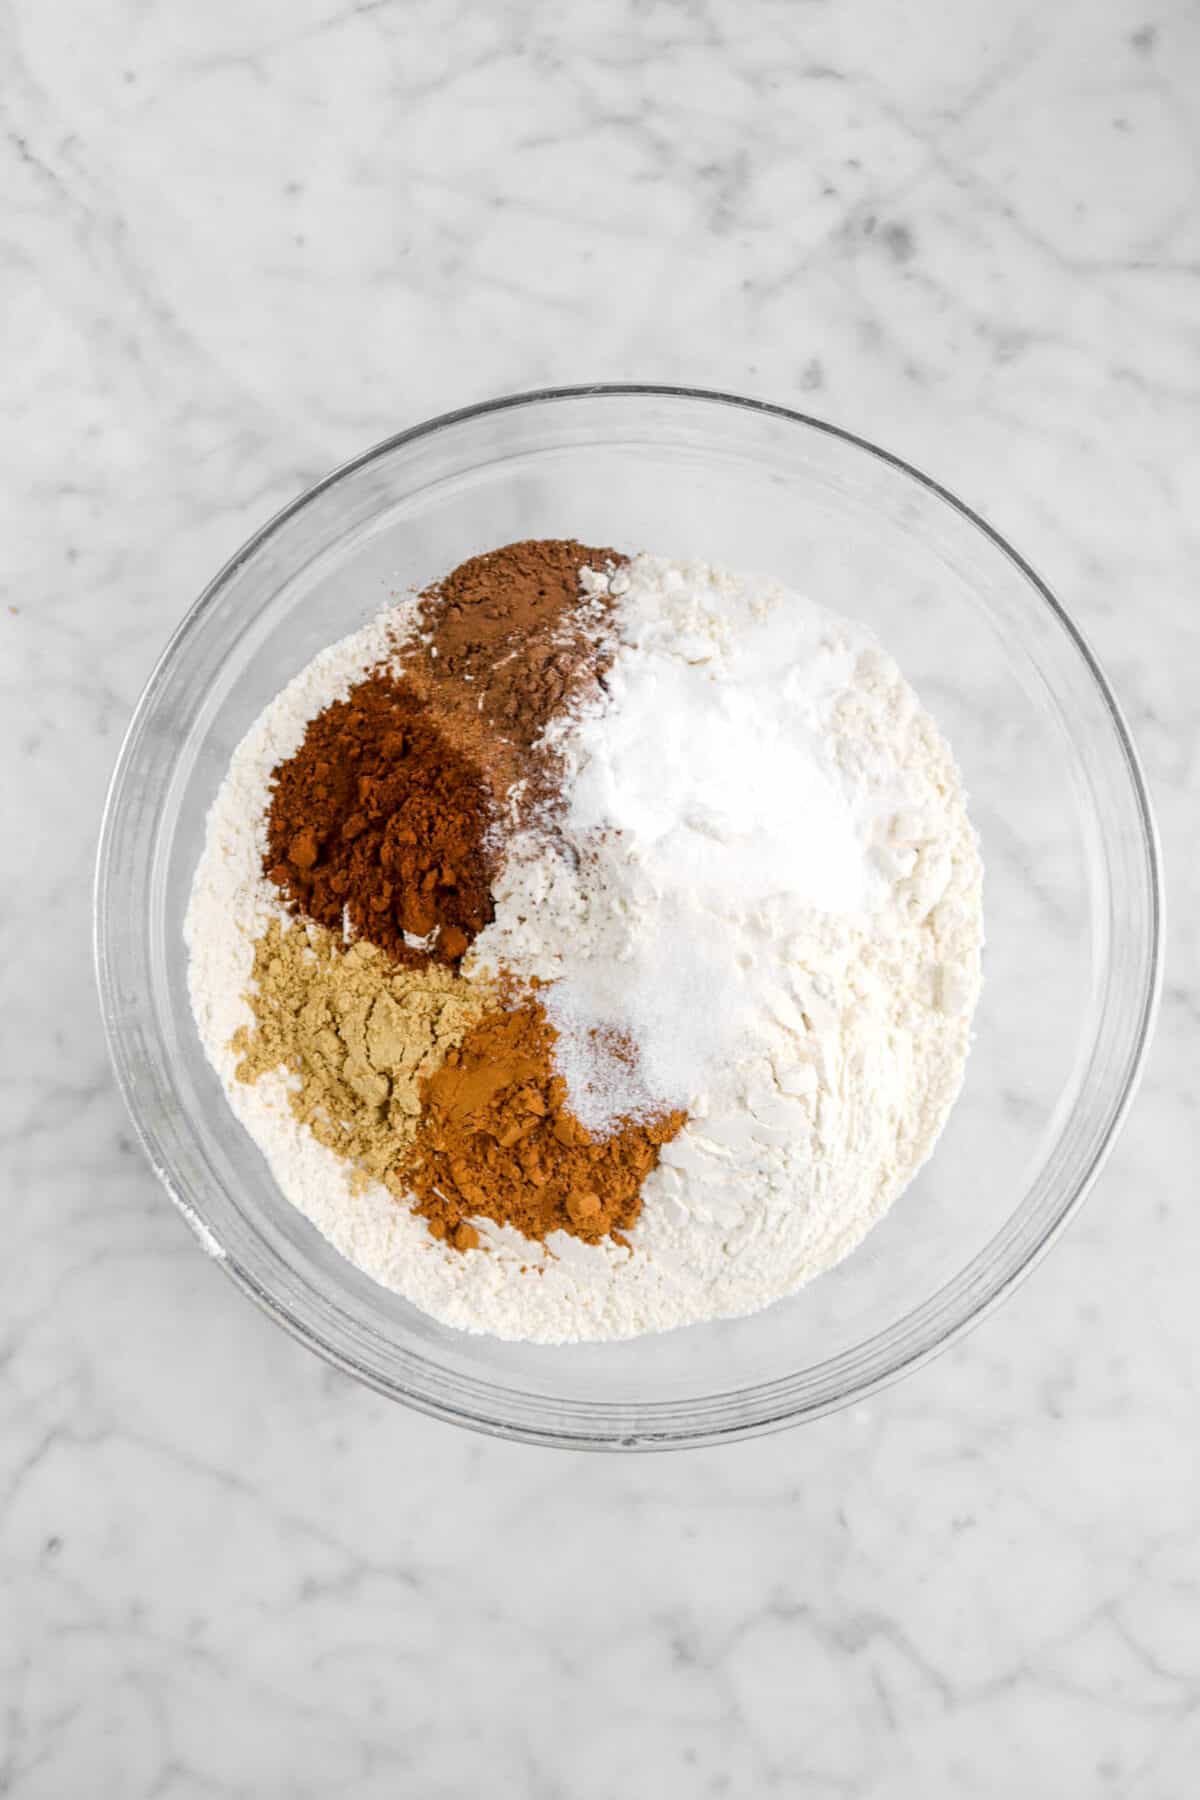 spices, flour, baking soda, and salt in glass bowl